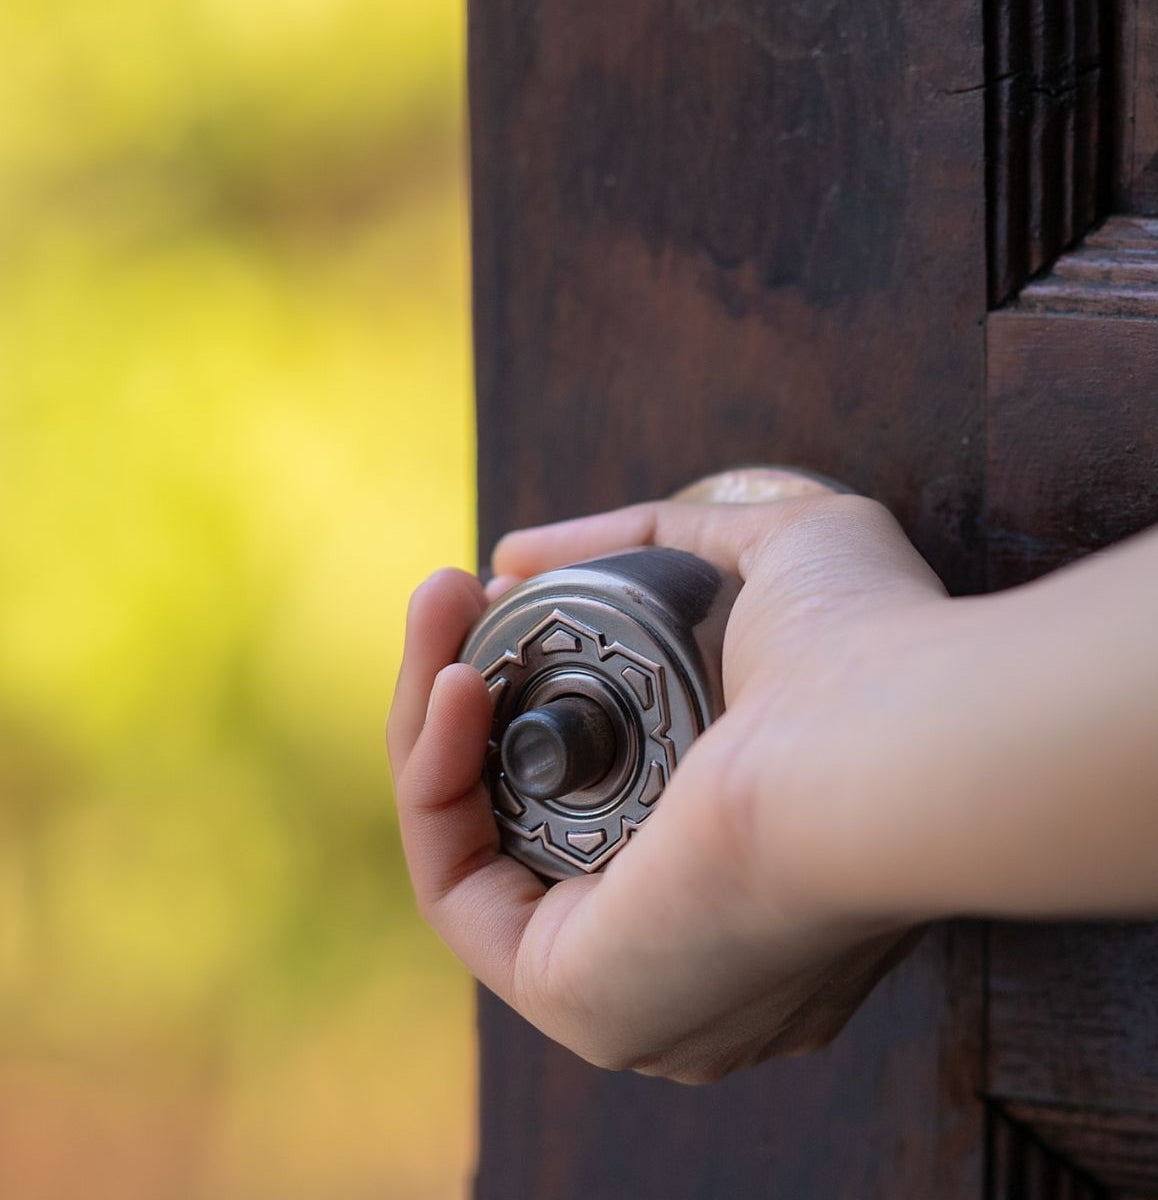 Hand opening up doorknob with outdoors in the background